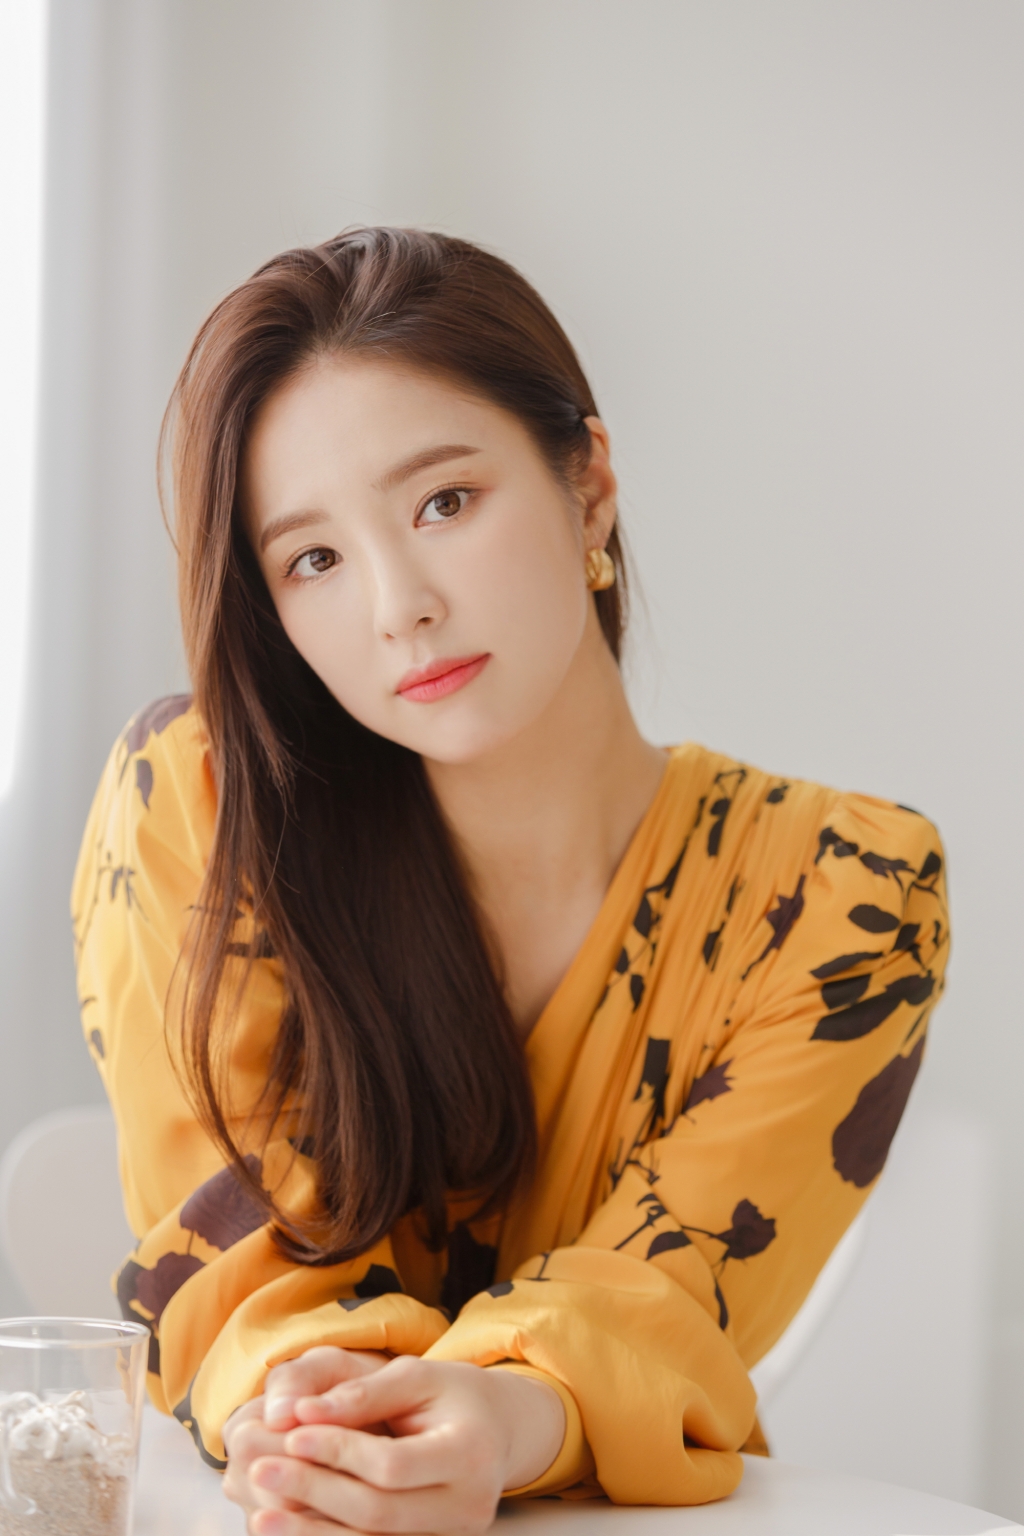 Actor Shin Se-kyung, 29, mentioned the warm-hearted scene with the leading actors in Newcomer Rookie Historian Goo Hae-ryung.Shin Se-kyung recently interviewed MBC drama New Entrepreneur Rookie Historian Goo Hae-ryung (hereinafter referred to as Rookie Historian Goo Hae-ryung) at a cafe in Nonhyeon-dong, Gangnam-gu, Seoul.Rookie Historian Goo Hae-ryung is the first problematic Ada Lovelace () Rookie Historian Goo Hae-ryung of Joseon and the Phil full romance annals of the anti-war Mother Solo Prince Irim.Shin Se-kyung took on the role of Chosuns first Ada Lovelace Rookie Historian Goo Hae-ryung.Rookie Historian Goo Hae-ryung is a person who tells him the world outside the palace by recording his 24 oclock in close proximity to the Daewon Daegun Irim (Cha Eun-woo).Shin Se-kyung first met Cha Eun-woo in this work as a male and female protagonist.It was great fun and the energy (Cha Eun-woo) had was bright and positive, said Cha Eun-woo, with his performance with Cha Eun-woo.I was shooting together for about six months and it was hot and exhausting, but it was like a lot of schedule and hard work, but it was a lot of good influence. Lee Ji-hoon, who plays Rookie Historian Goo Hae-ryung Min Woo-won, met again in the historical drama since Kwon Ryong I Narsa in 2015.Shin Se-kyung said, I felt how great an actor I was when I saw Lee Ji-hoons true value at this scene.There were so many moments of concentration that I felt I should follow, and it was a good stimulus. It was interesting to be able to show Kimi as an advanced and junior.It was good not only for melodrama, but also for the strong chemistry of seniors and juniors, he said.The Ada Lovelace 4th Man chemistry of Song Sa-hee (Park Ji-hyun), Oh Eun-im (Lee Ye-rim) and Hearan (Jang Yu-bin) along with Rookie Historian Goo Hae-ryung was another fun of the play.Shin Se-kyung said, We were so breathing together, each of us had a different characters disposition, so we thought we should make good use of each others scenes.I tried to do a good reaction even if it was a small figure. In the second half, I did not have to discuss it.Especially, there were many characters in the space itself, and I tried to take out the characters and read a lot of reading work. It is one of the spaces that I am so satisfied and caring about. 